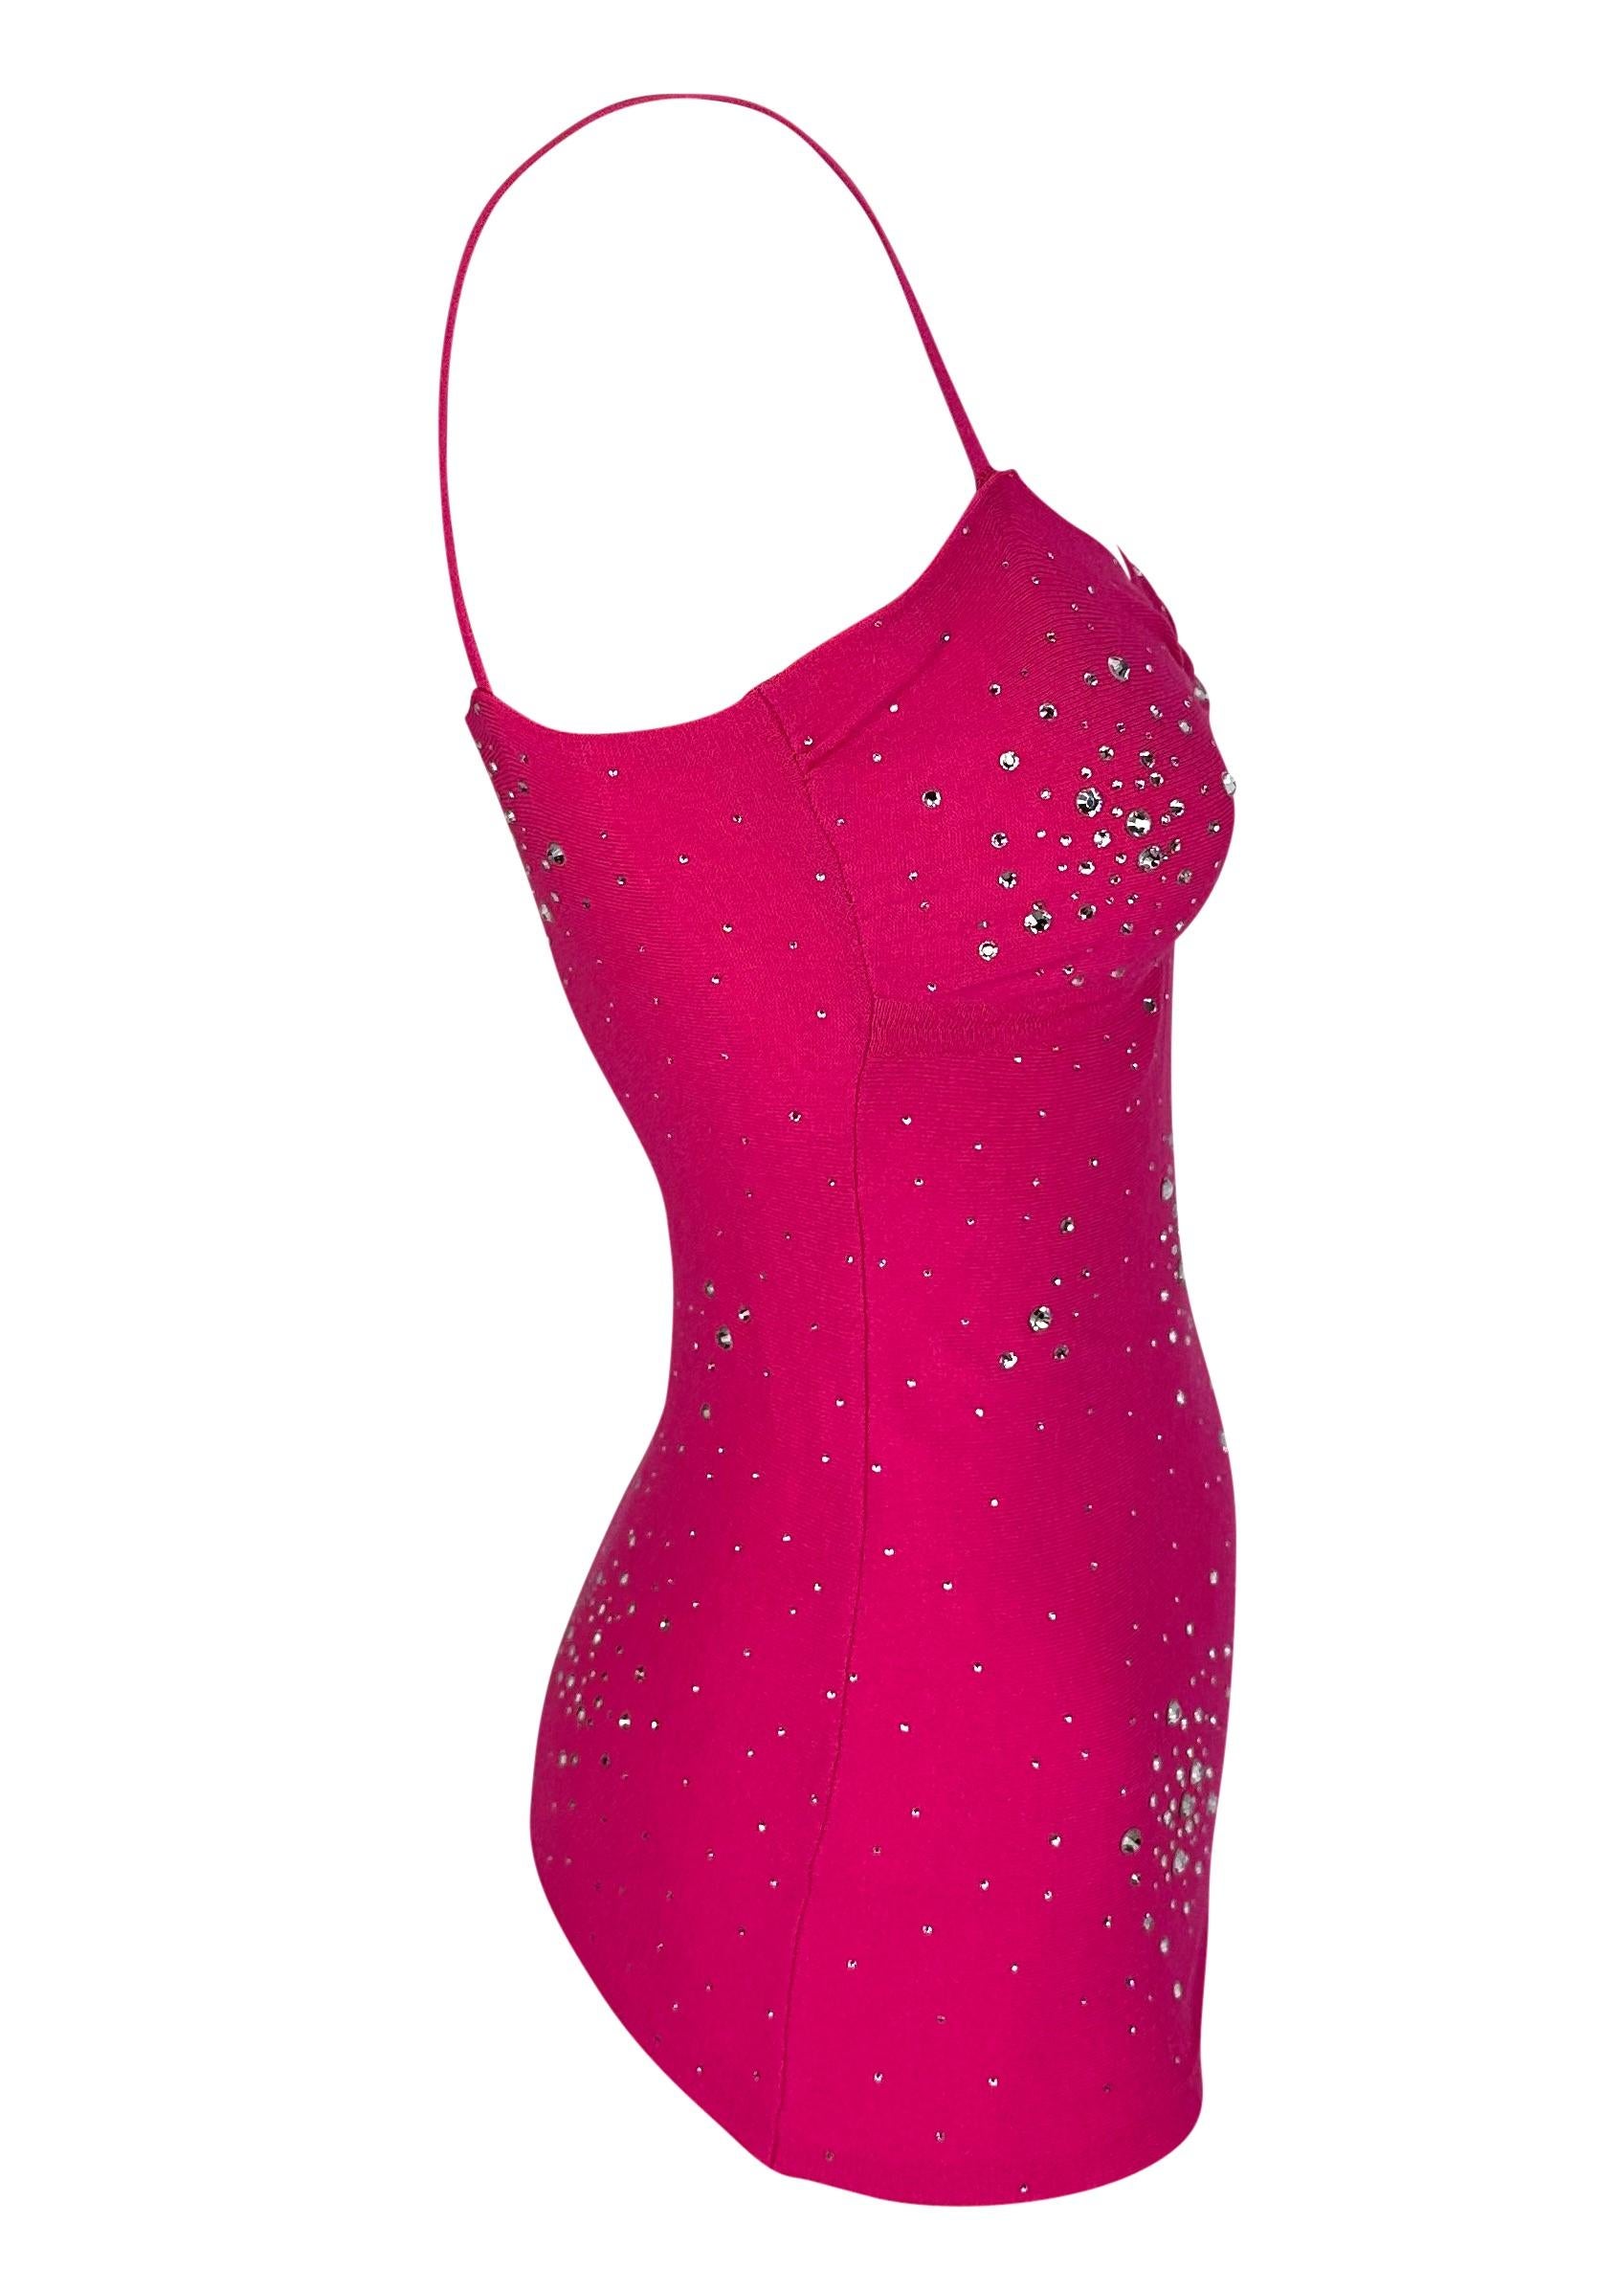 Women's S/S 2004 Versace by Donatella Hot Pink Rhinestone Stretch Knit Tank Top  For Sale